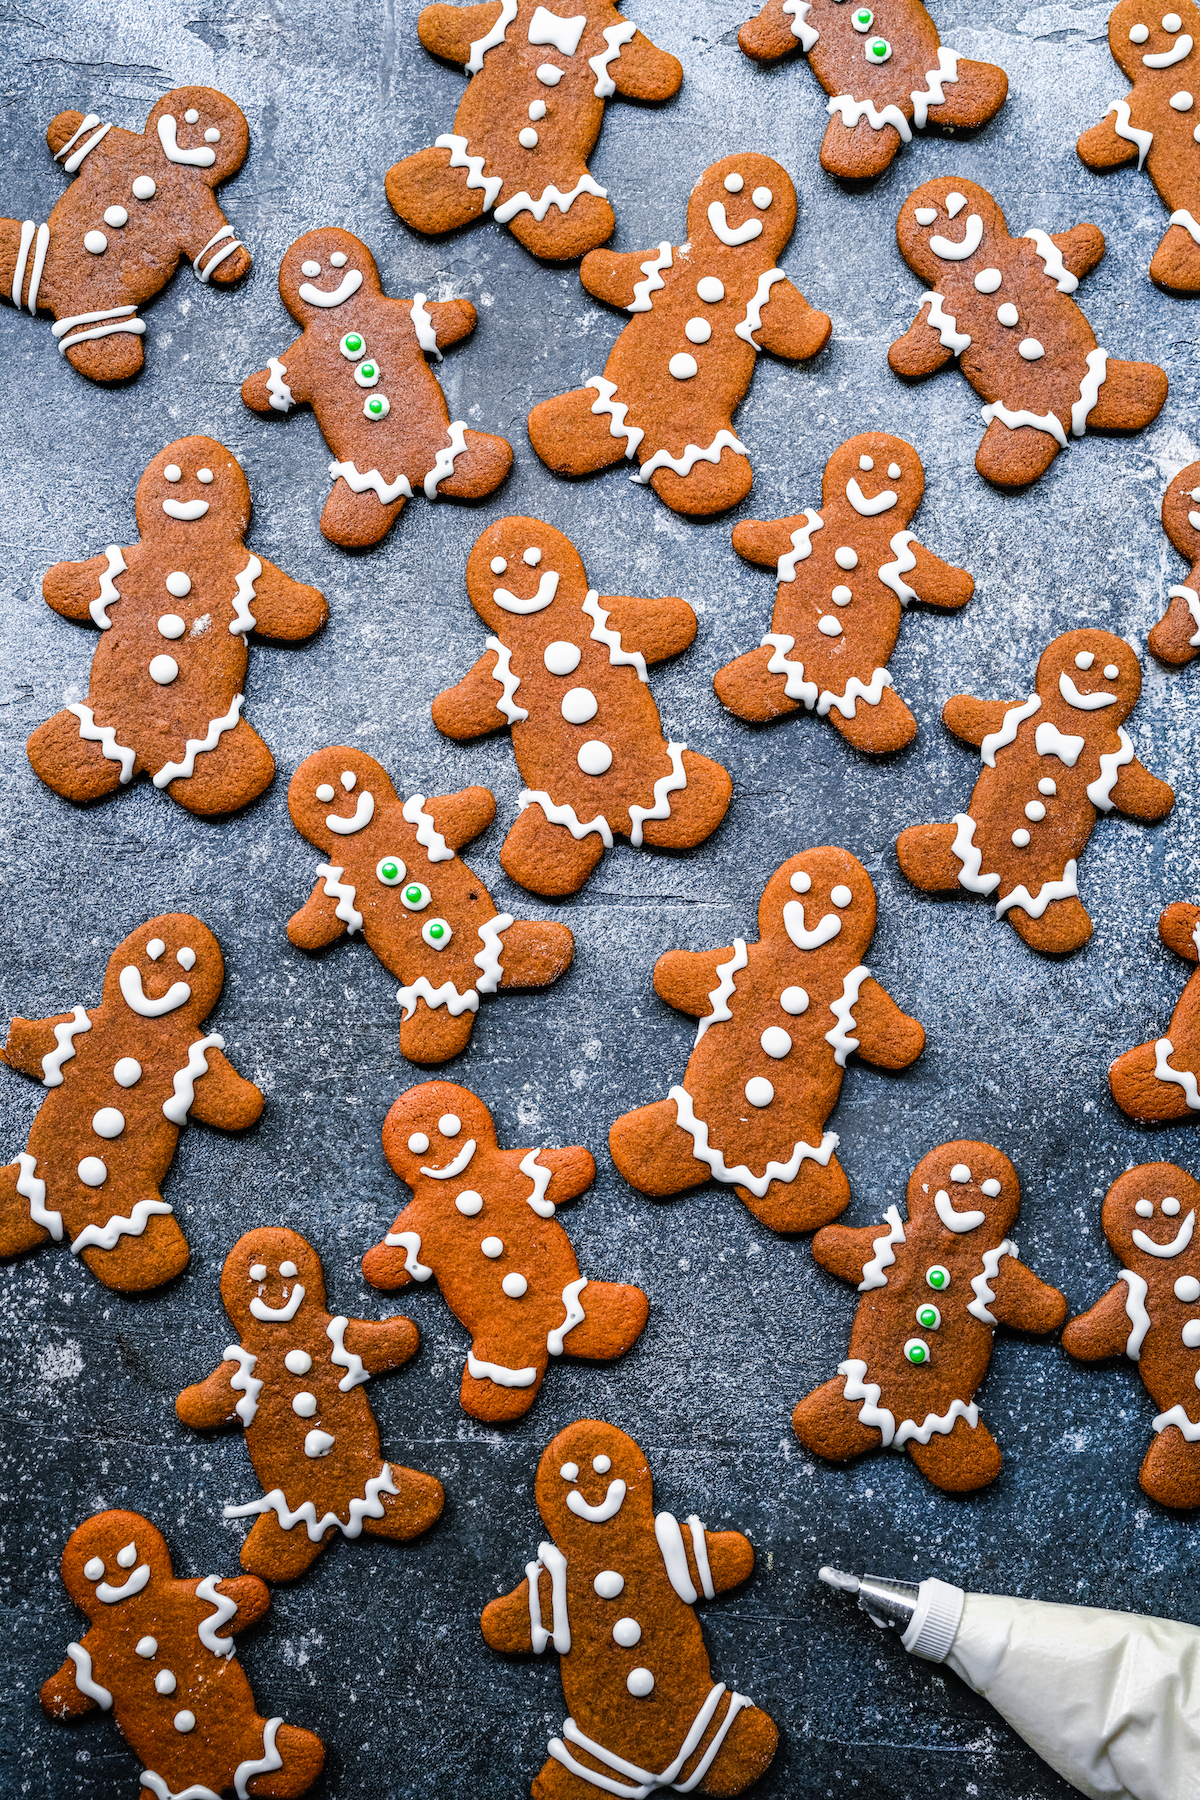 Gingerbread cookies decorated with royal icing.